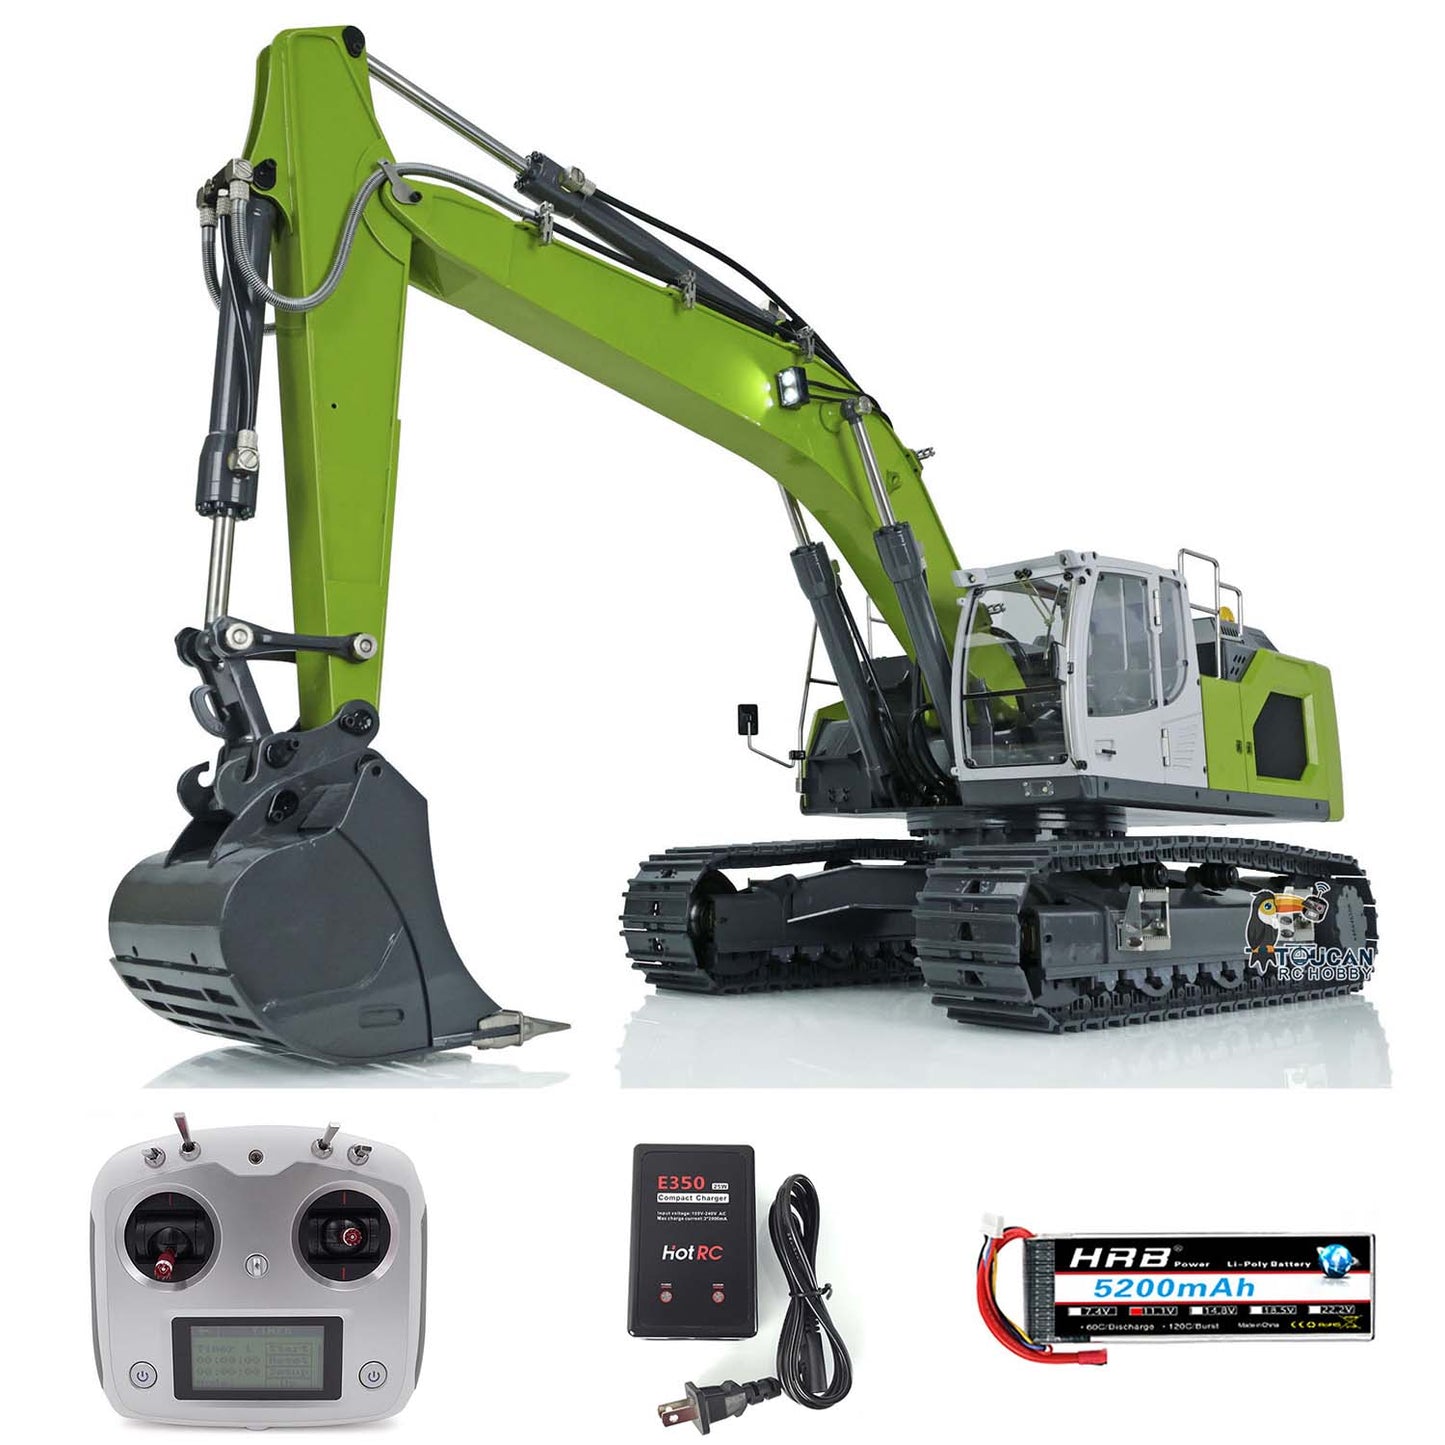 IN STOCK 1/14 Hydraulic RC Excavator L945 Metal RTR Construction Vehicles Radio Controlled Toys Remote Control Trucks Models Transmitter Battery